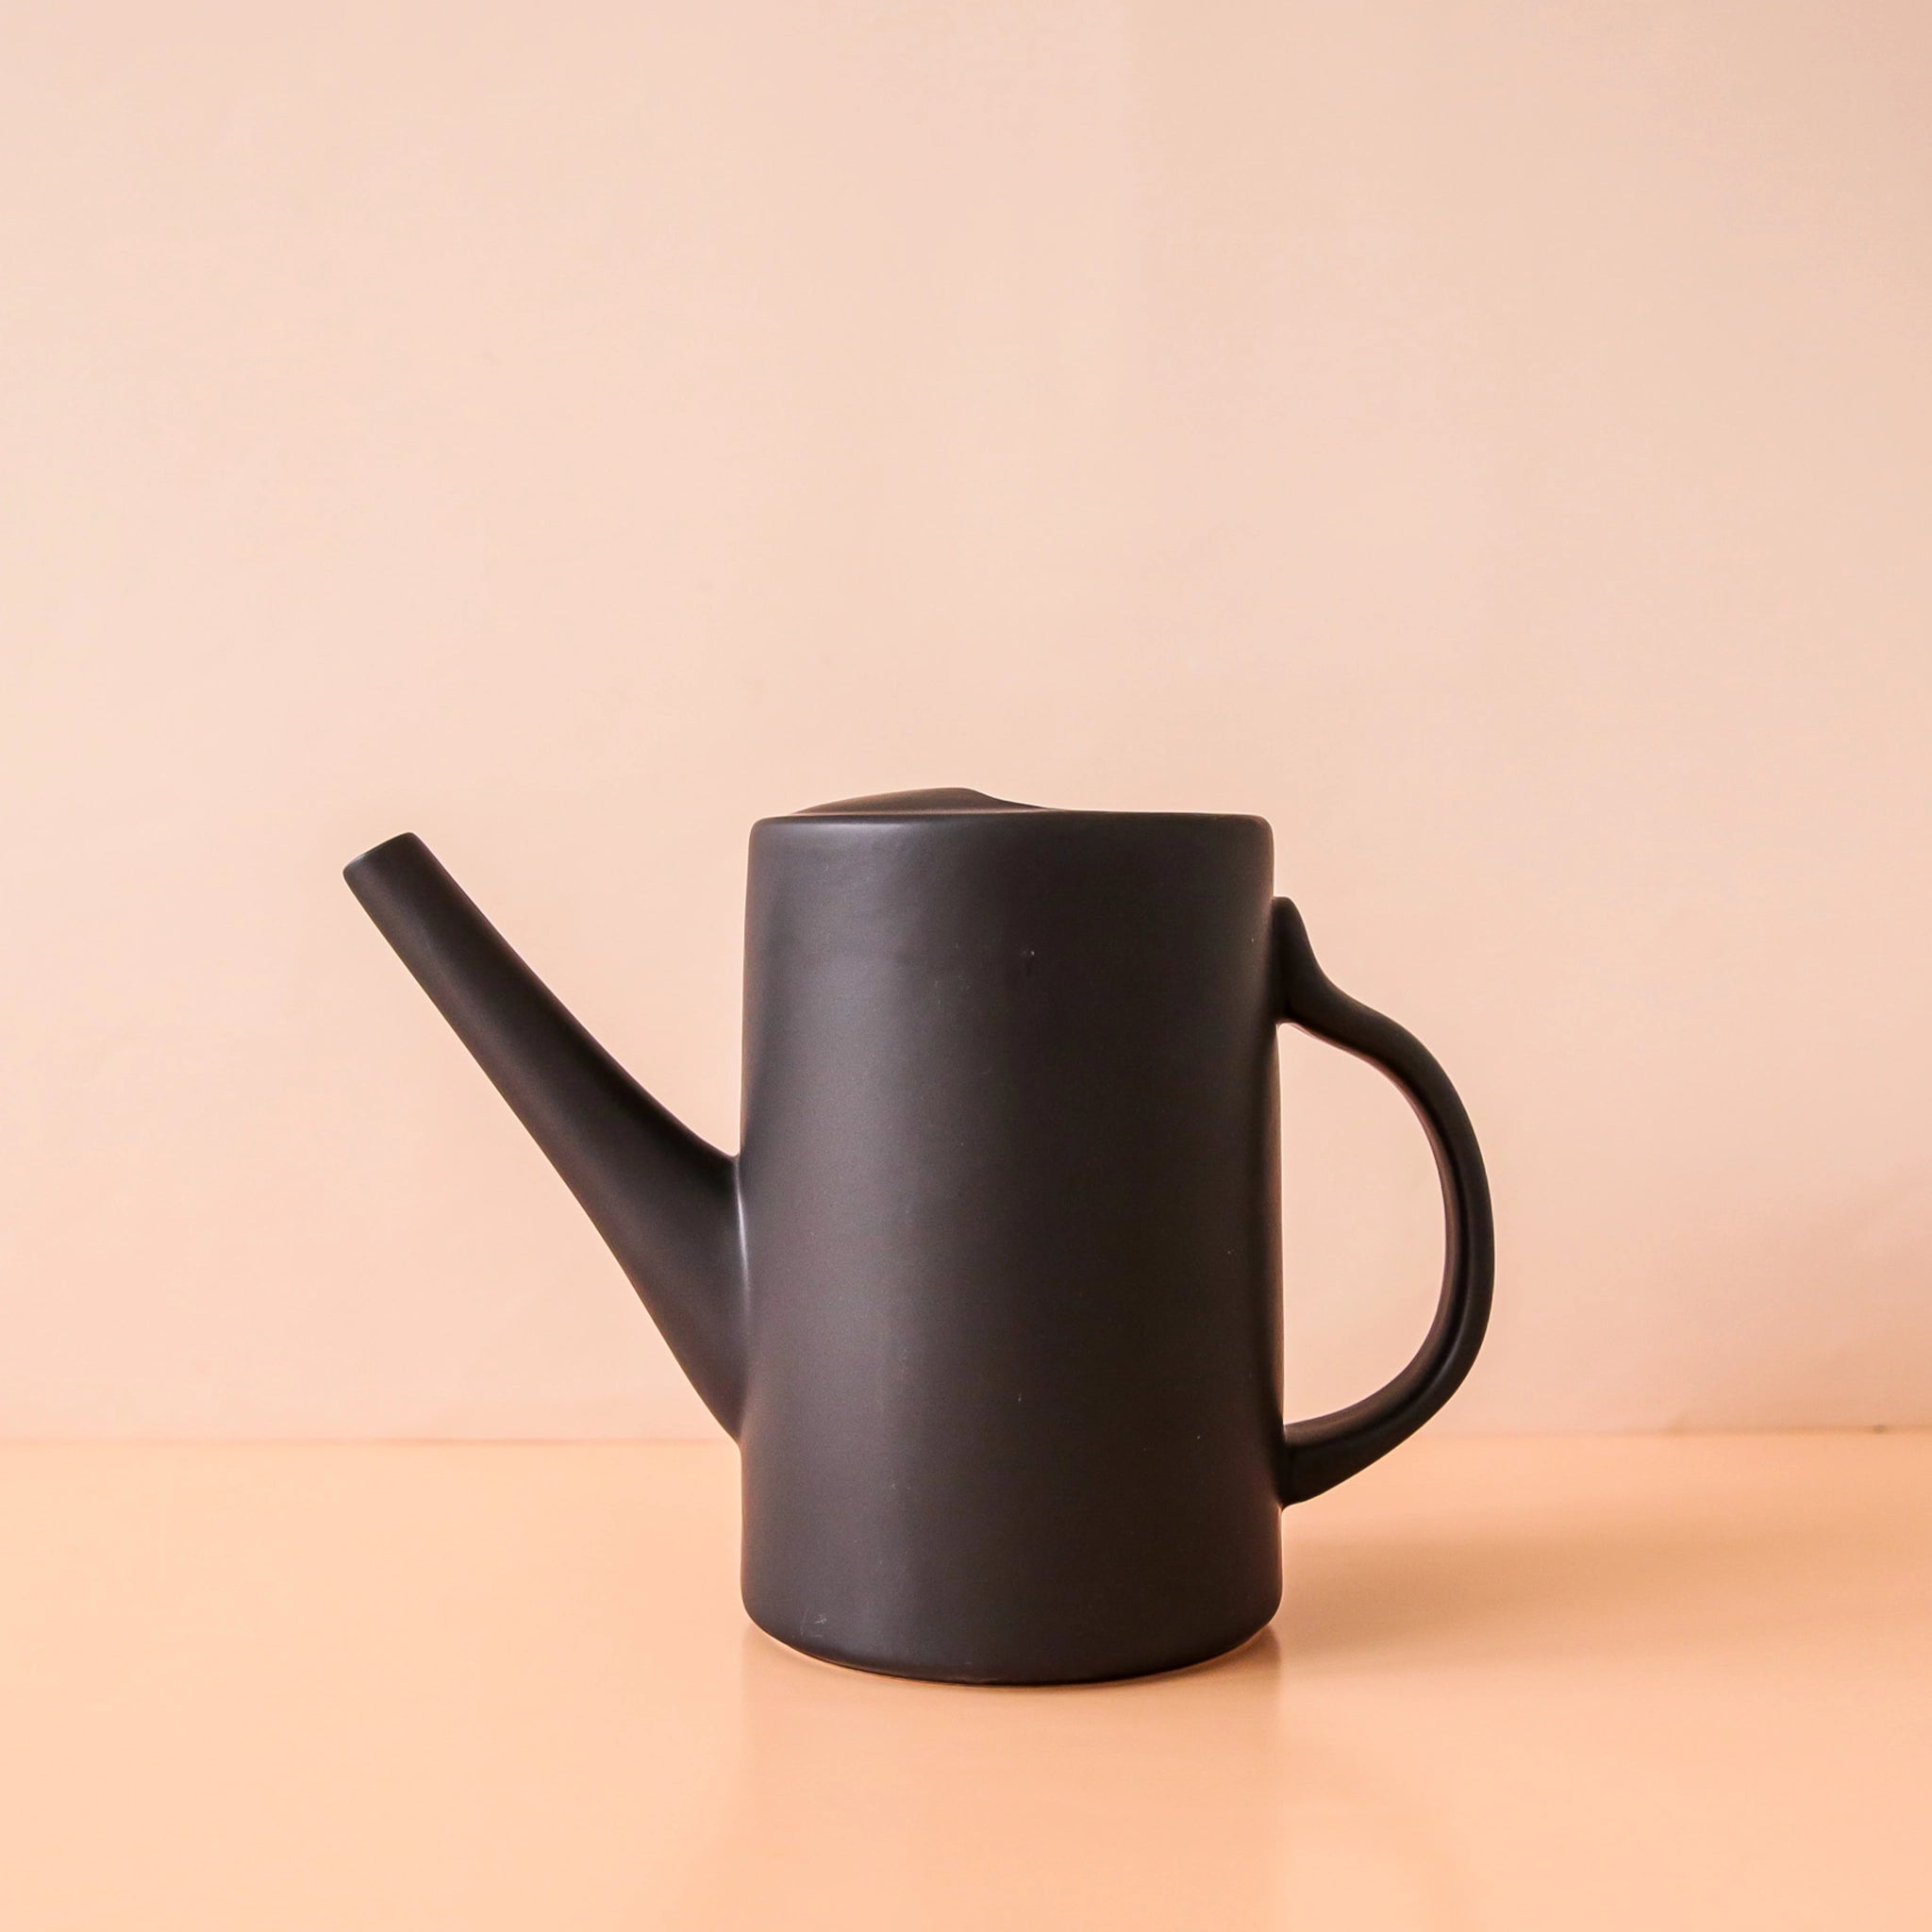 On a peach background is a back ceramic watering can with a narrow spout and a curved handle.